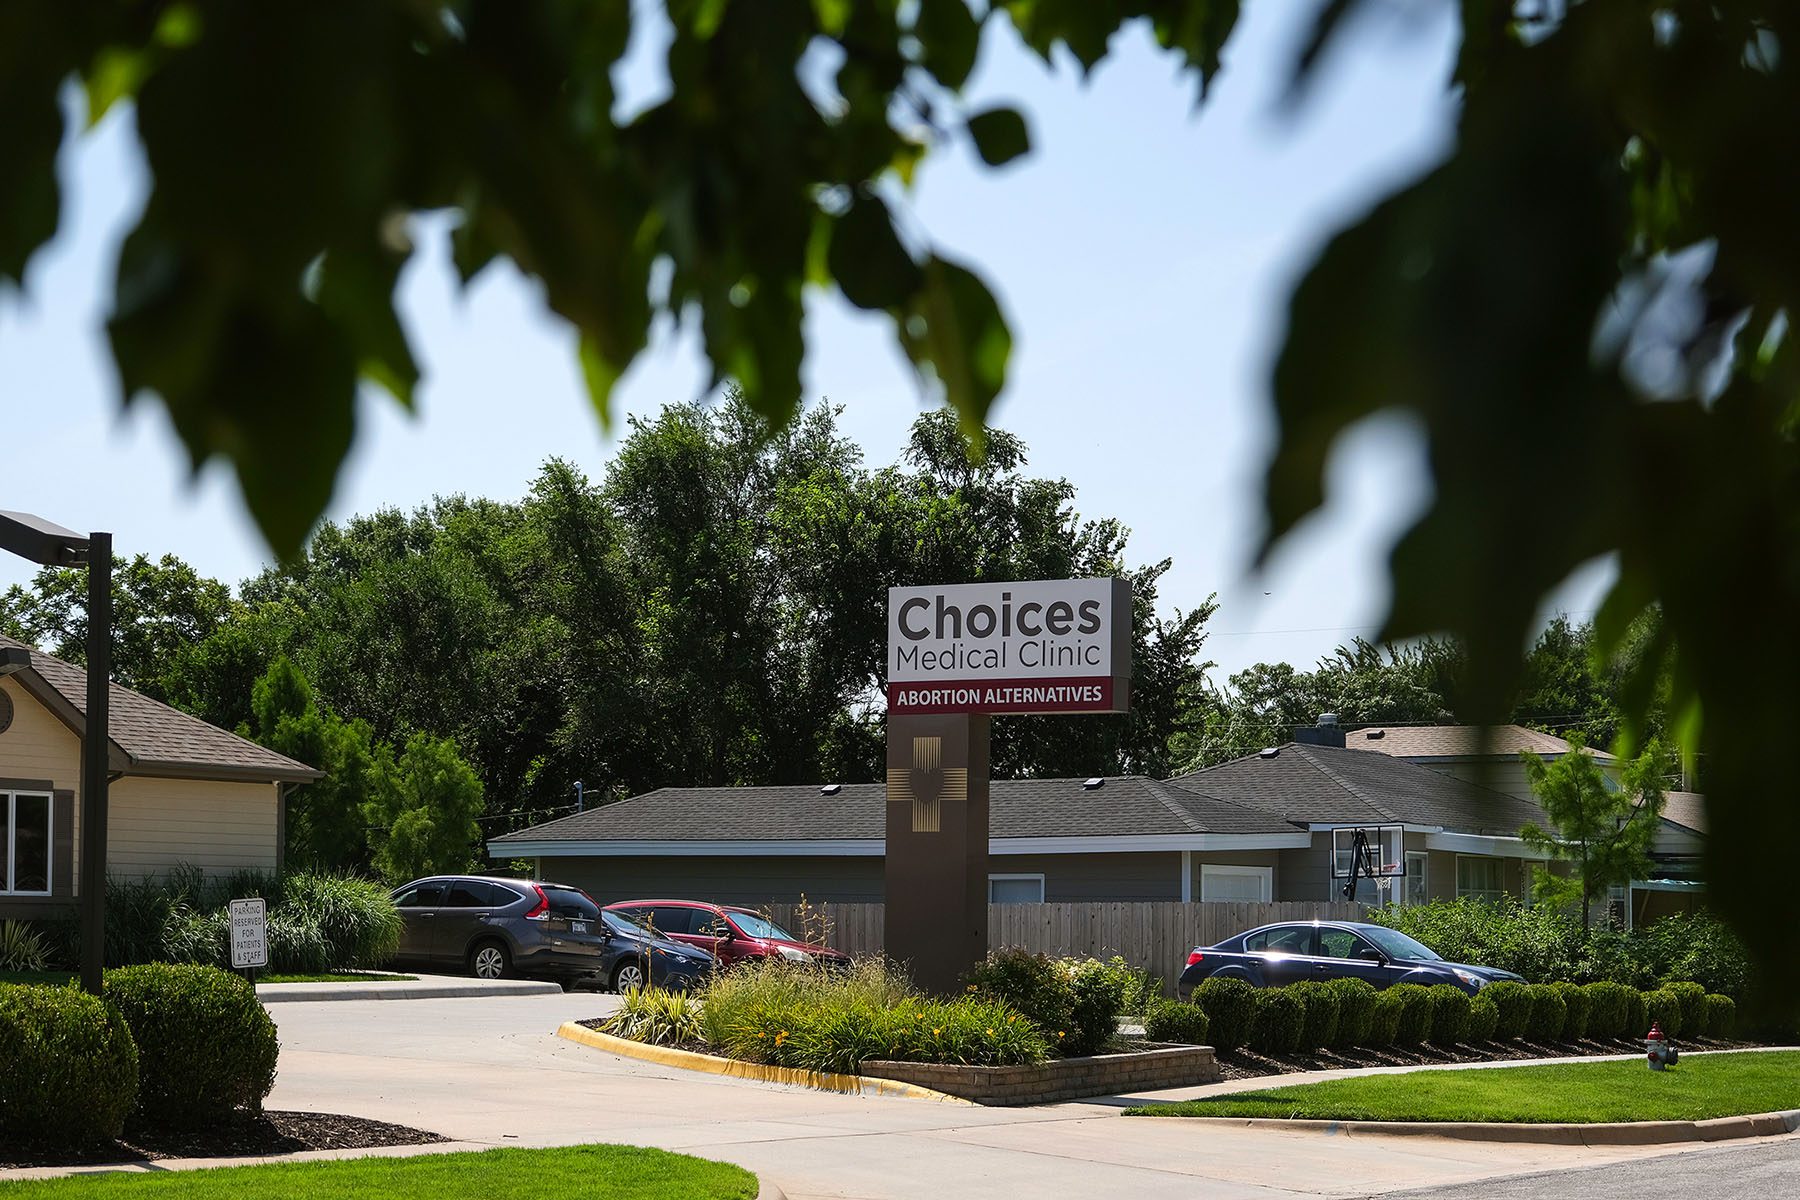 A sign for Choices Medical Clinic reads "Abortion Alternatives."